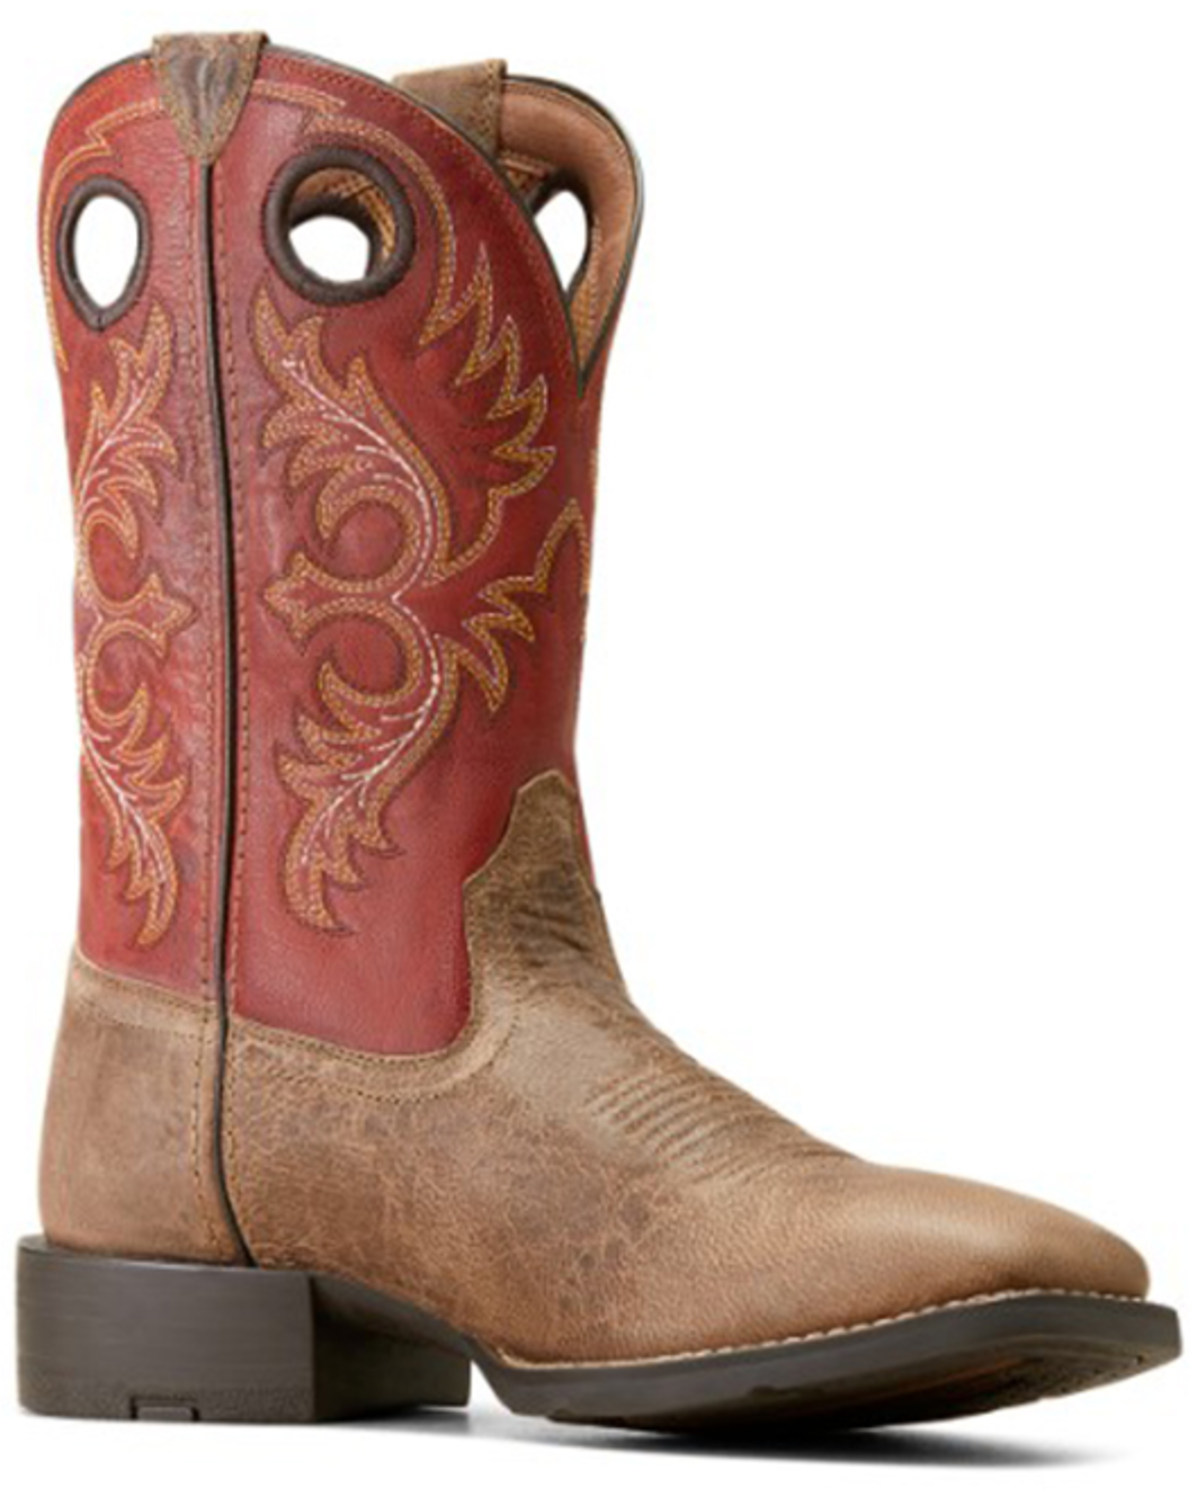 Ariat Men's Sport Rodeo Crazy Western Performance Boots - Broad Square Toe